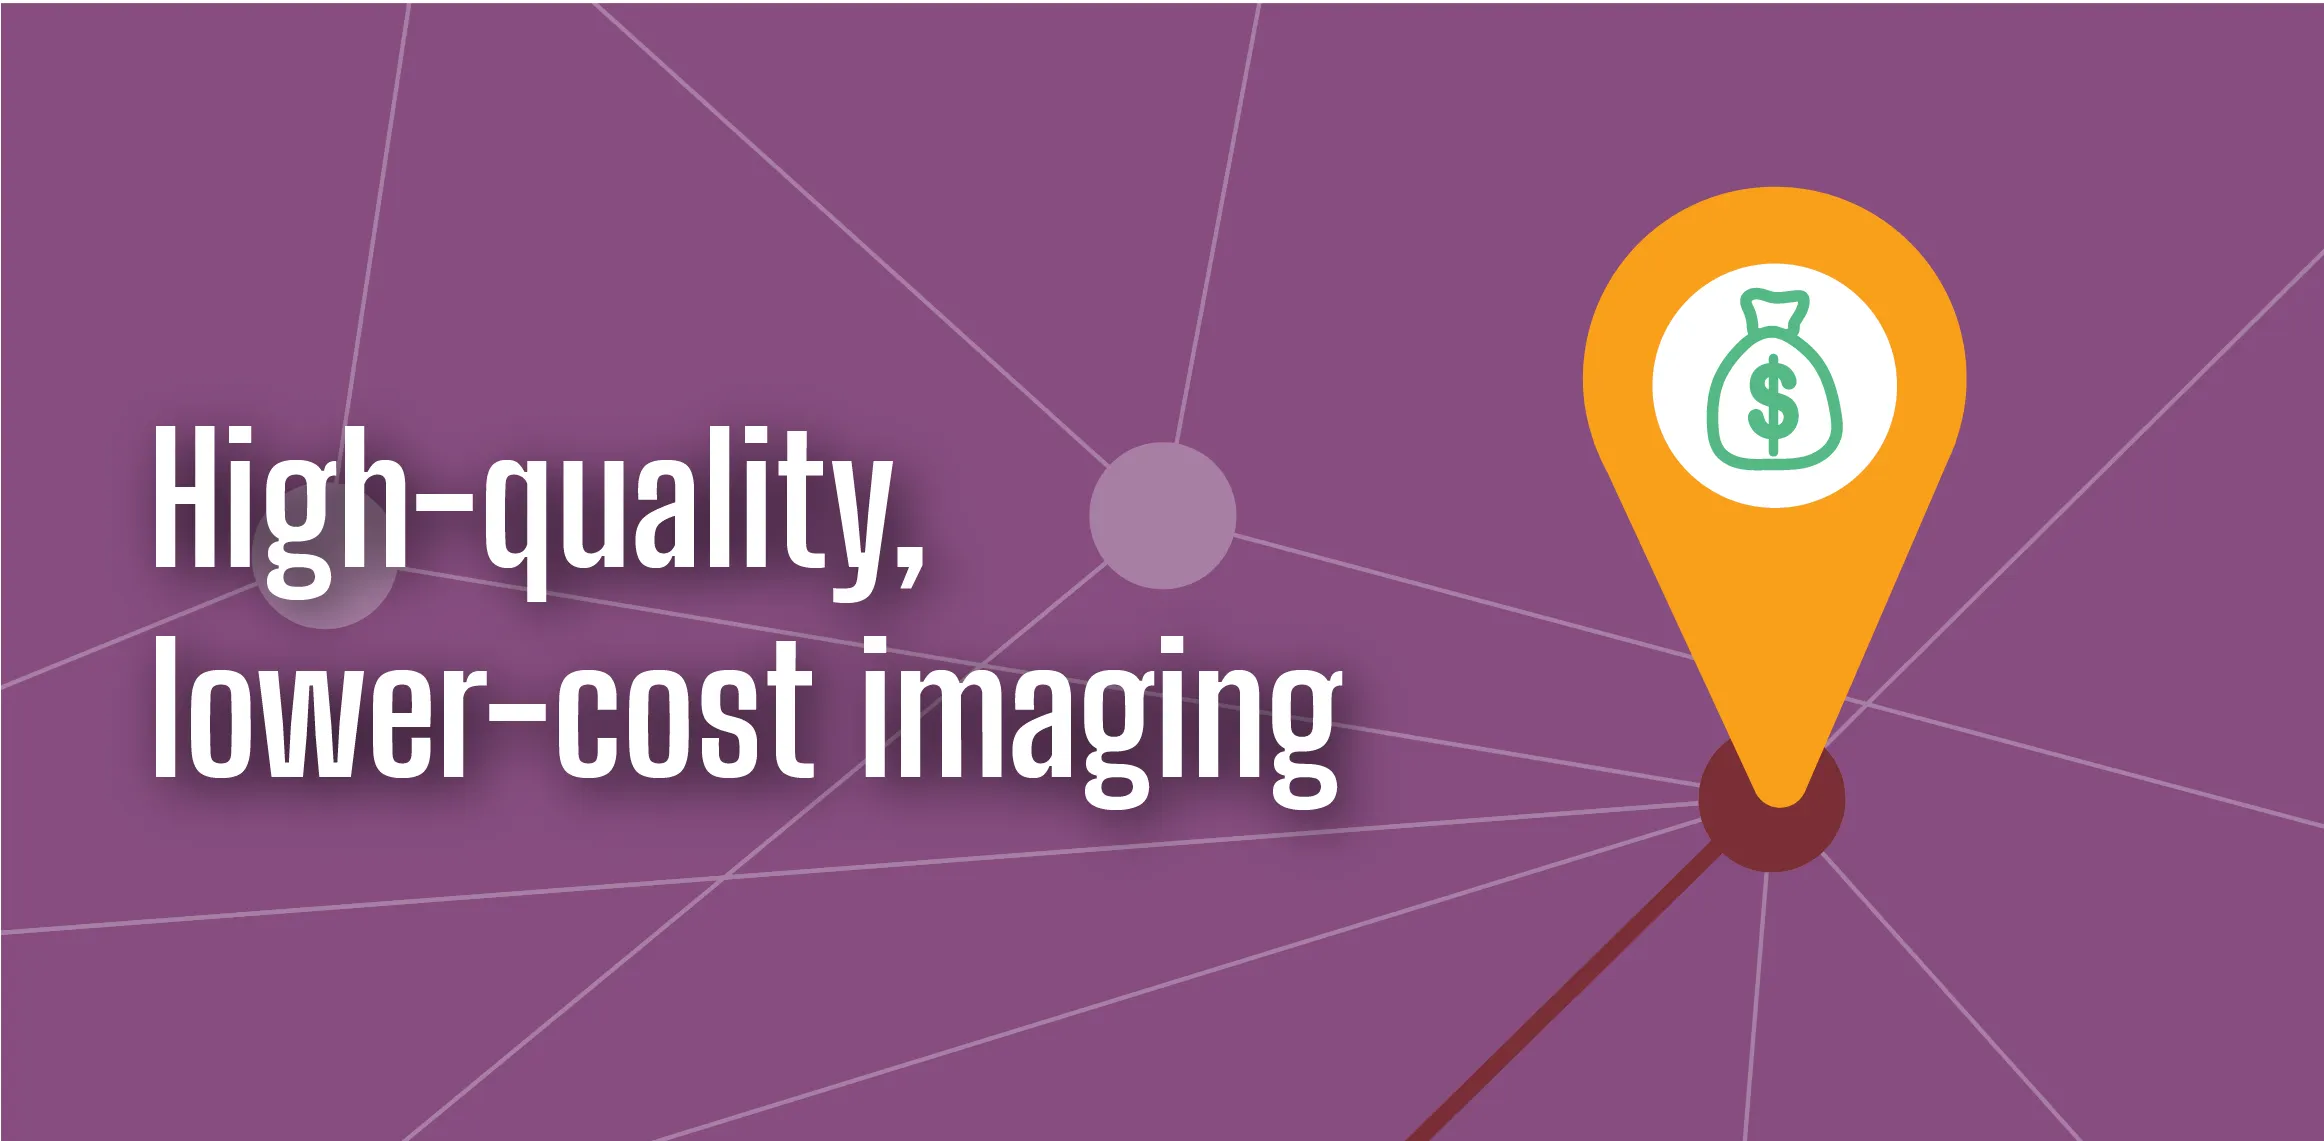 New Jersey High-quality, lower-cost Imaging